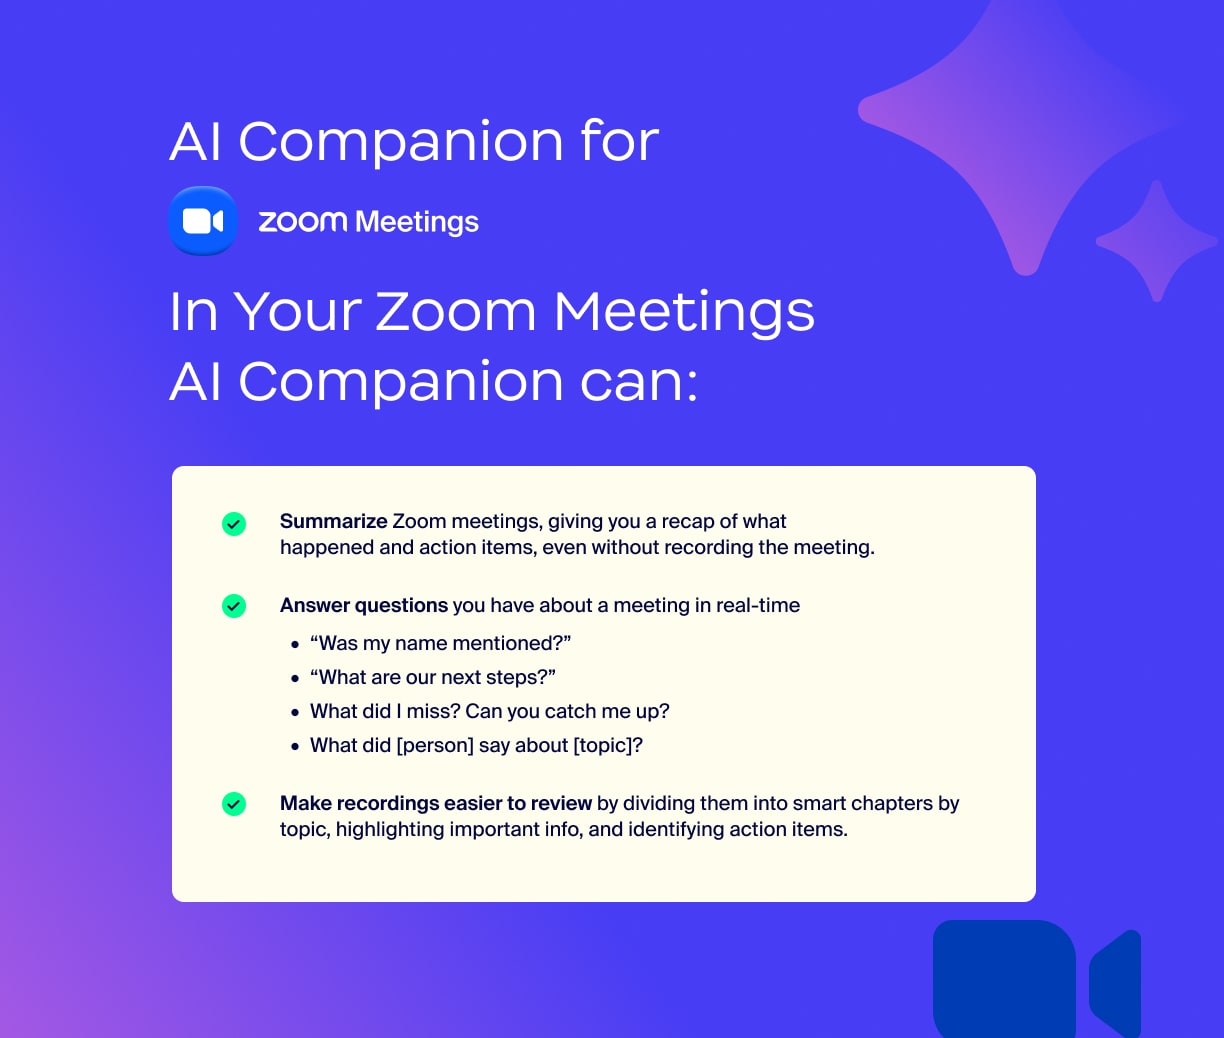 You can download and share assets like this graphic, detailing use cases for AI Companion in Zoom Meetings.